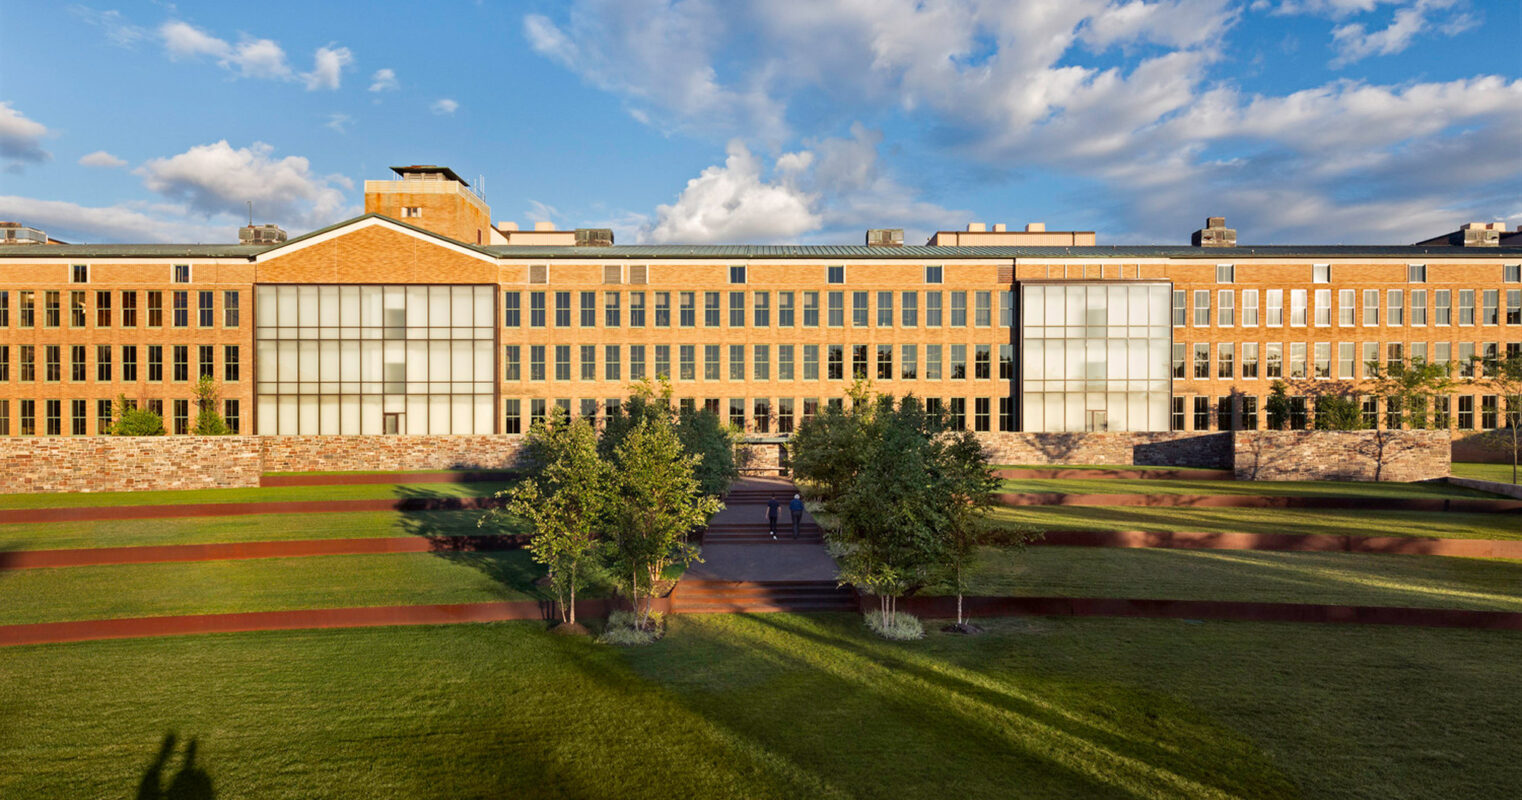 Large contemporary educational building with symmetrical design, expansive glass windows, and a flat roof. A central clock tower stands above an articulated brick facade, bordered by a manicured lawn and pathways in a campus setting at golden hour.